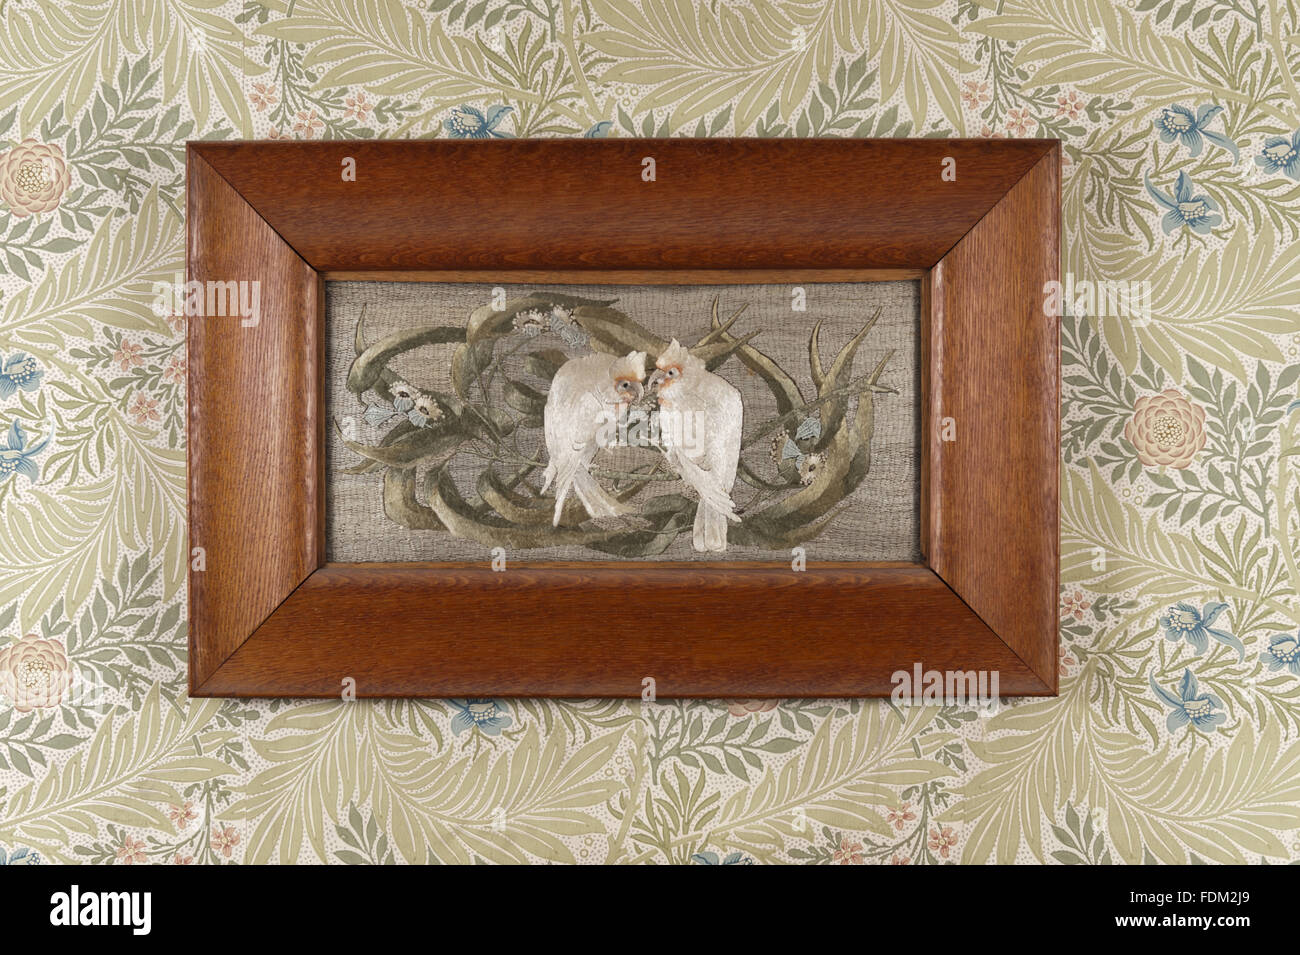 Framed silk embroidered picture in the Larkspur Bedroom at Standen, West Sussex. The design of two white birds and flowers is in the manner of Henry Stacey Marks, the embroidery was executed by Mrs Margaret Beale (1847-1936) and her three daughters. NT in Stock Photo